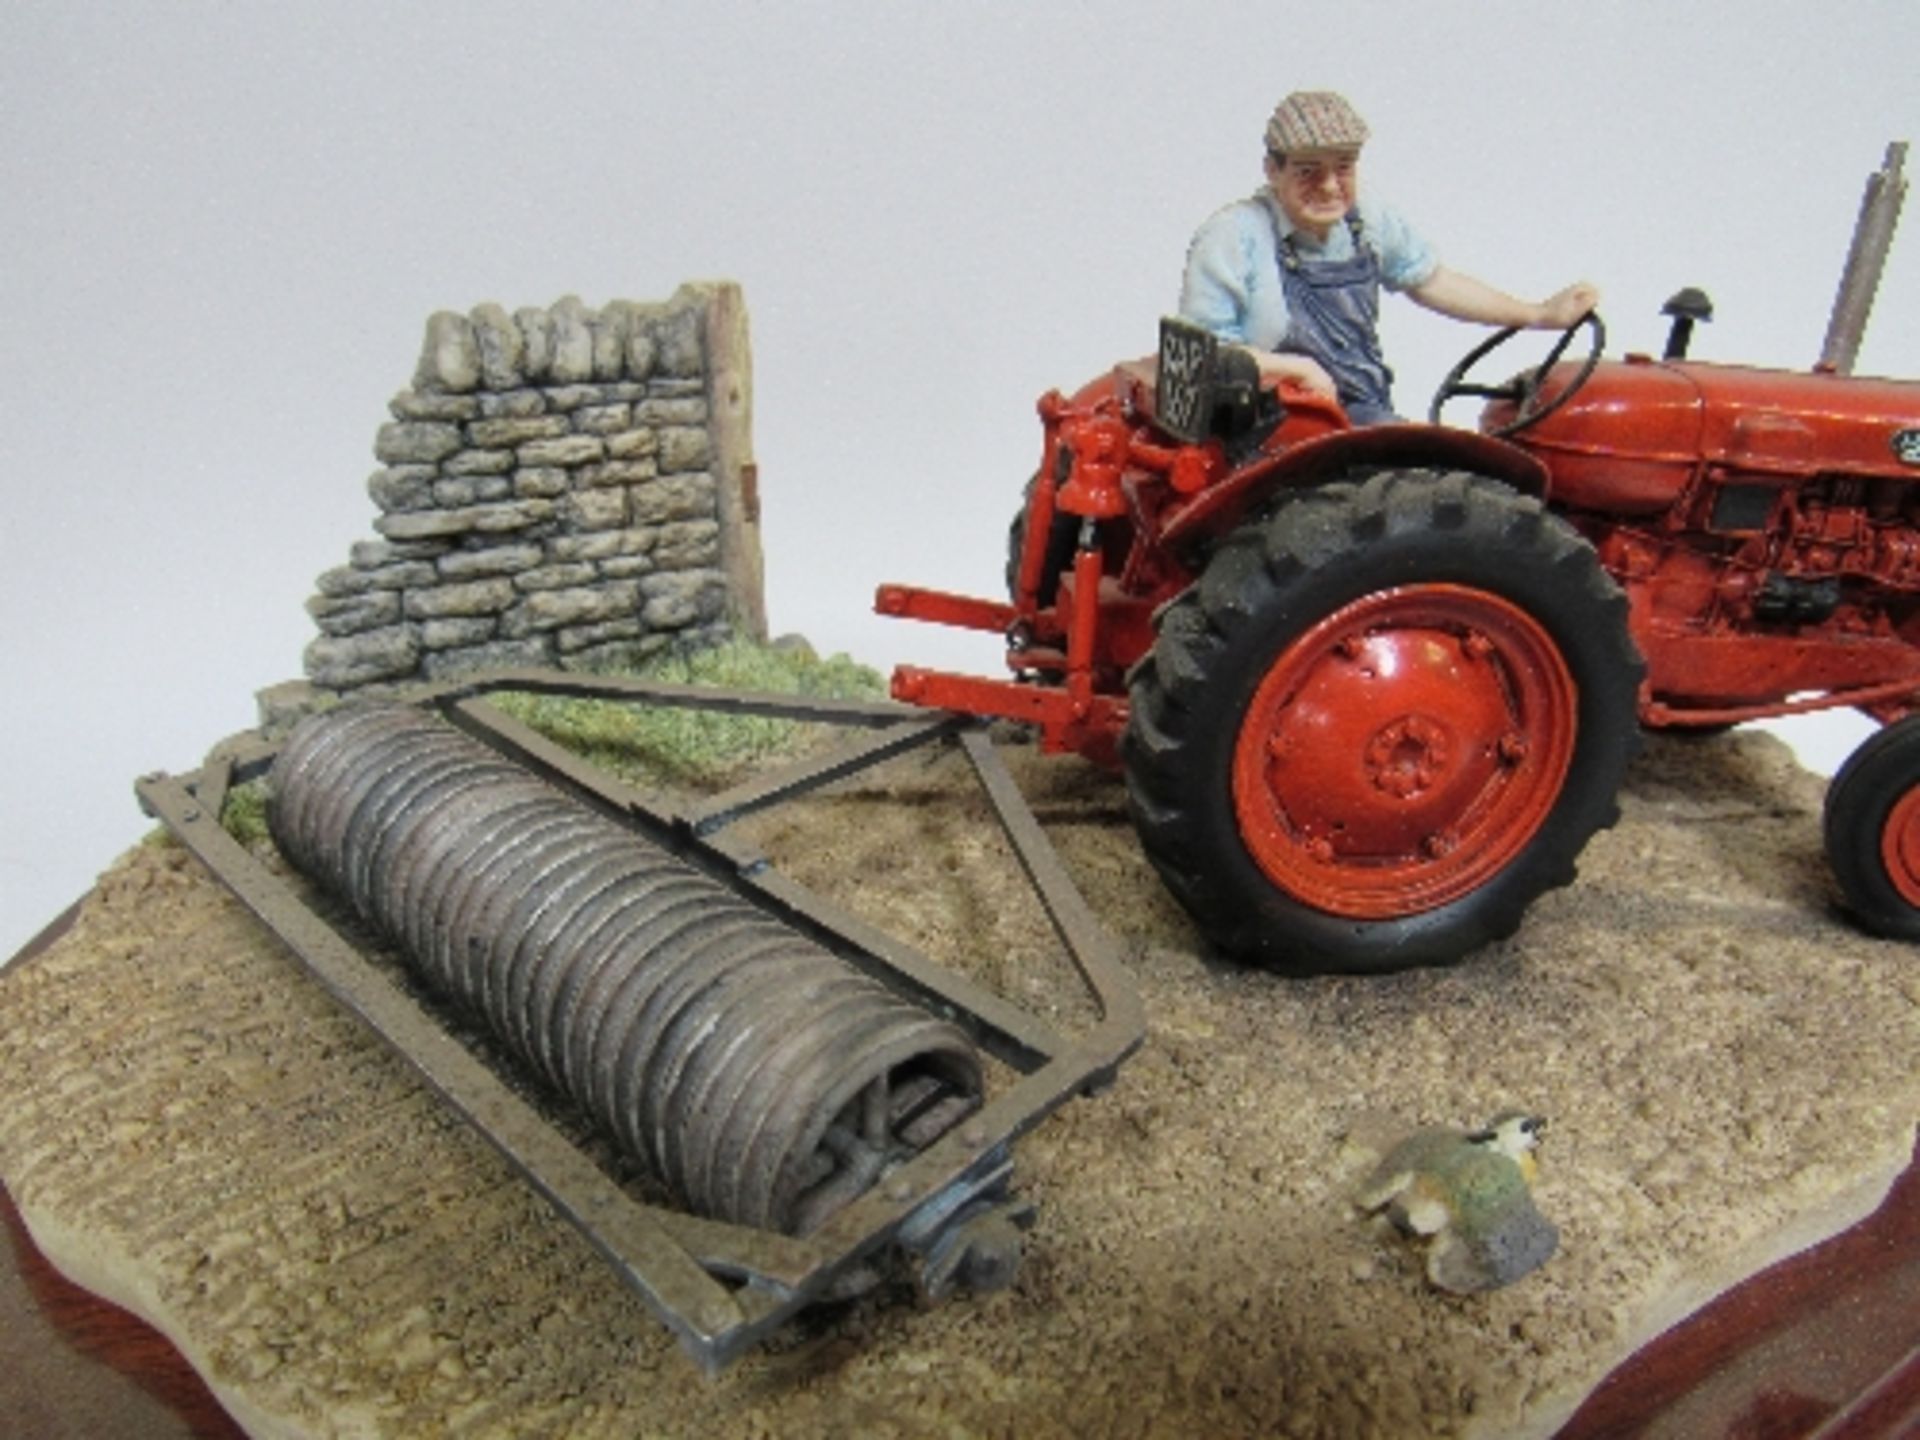 Border Fine Arts 'Turning with Care' Nuffield Tractor limited edition 1277 of 1750 Model B0094 - Image 2 of 5